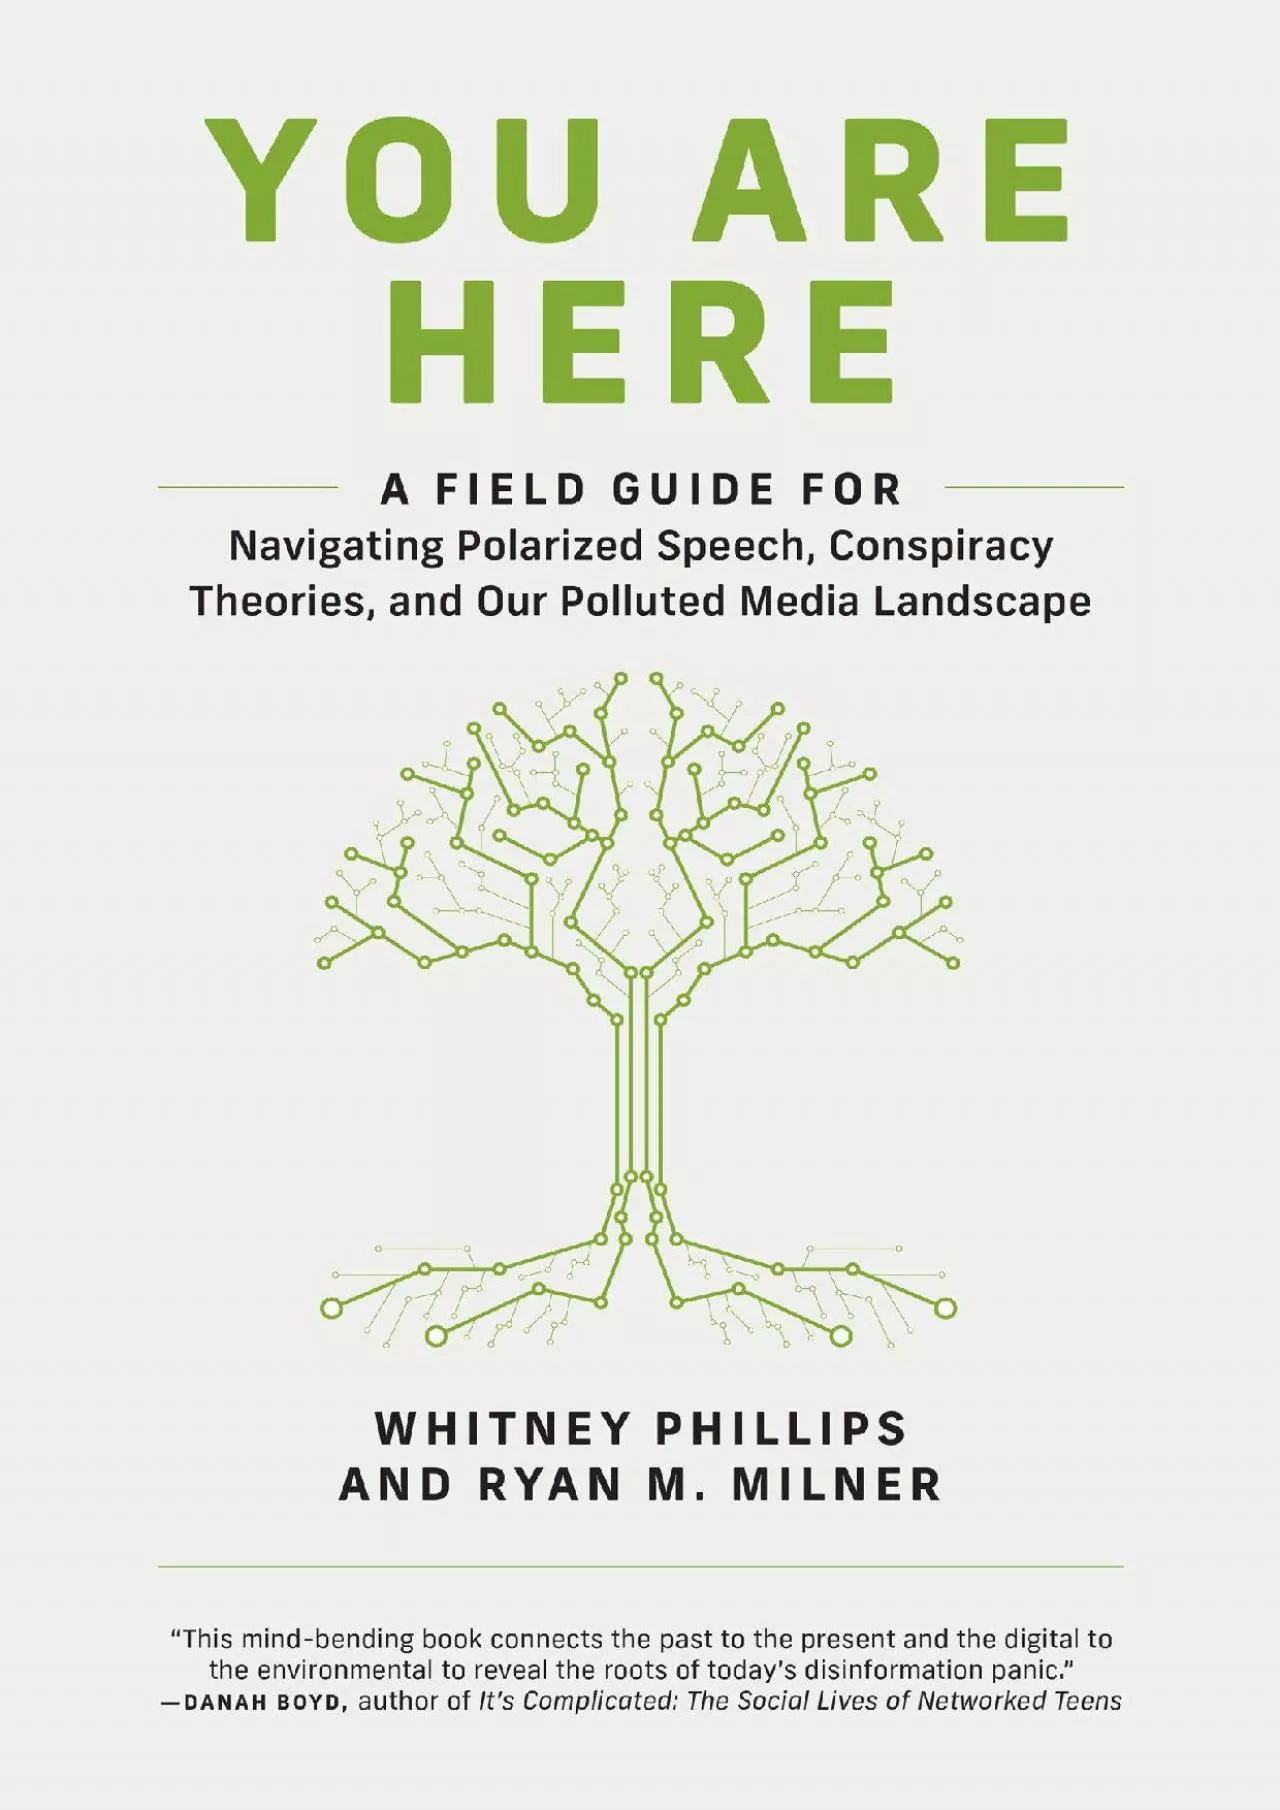 You Are Here: A Field Guide for Navigating Polarized Speech, Conspiracy Theories, and